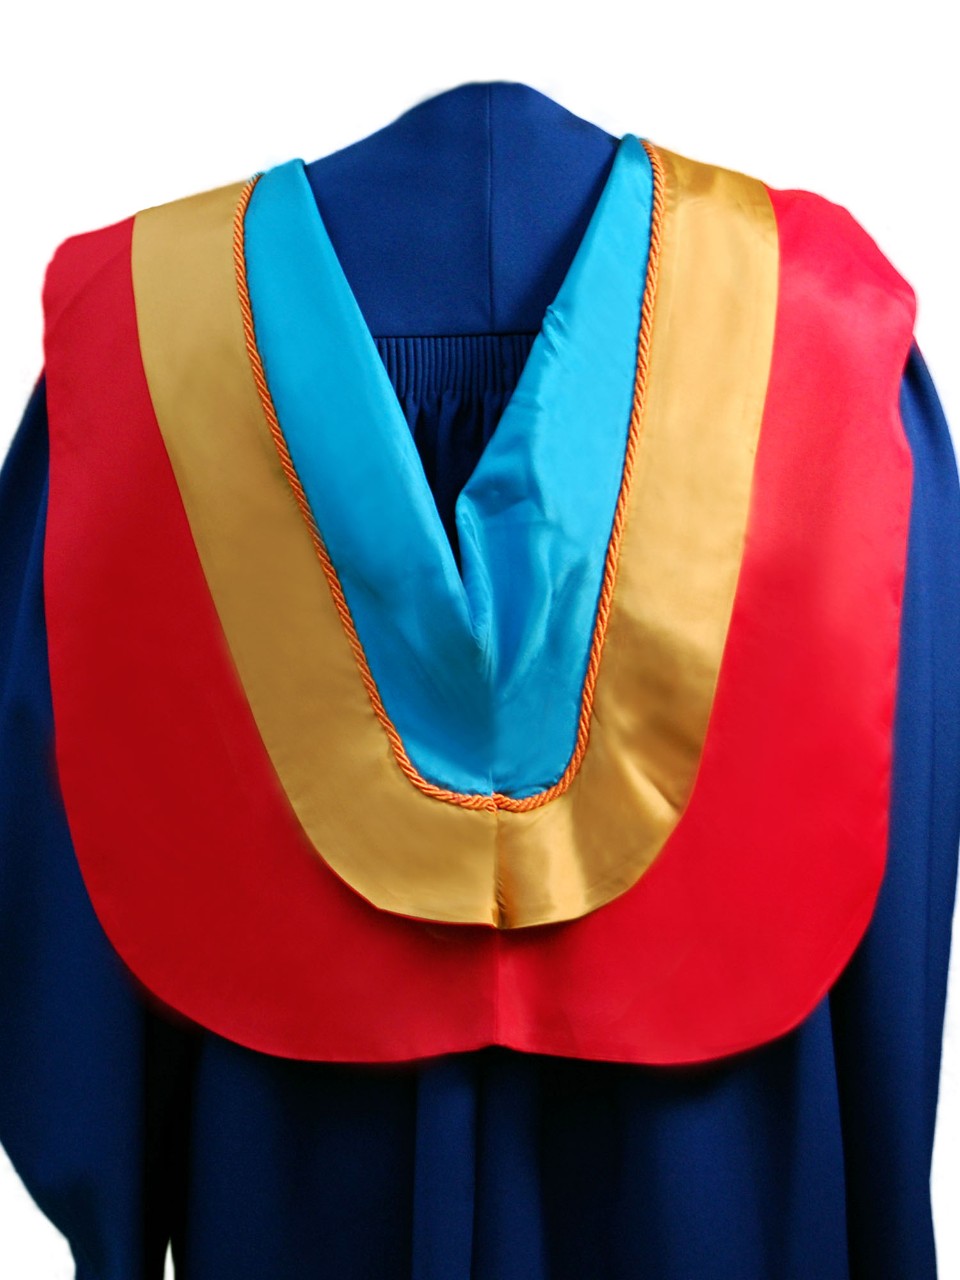 The Master of Environmental Toxicology hood is red with wide gold border, orange cording and aquamarine underside